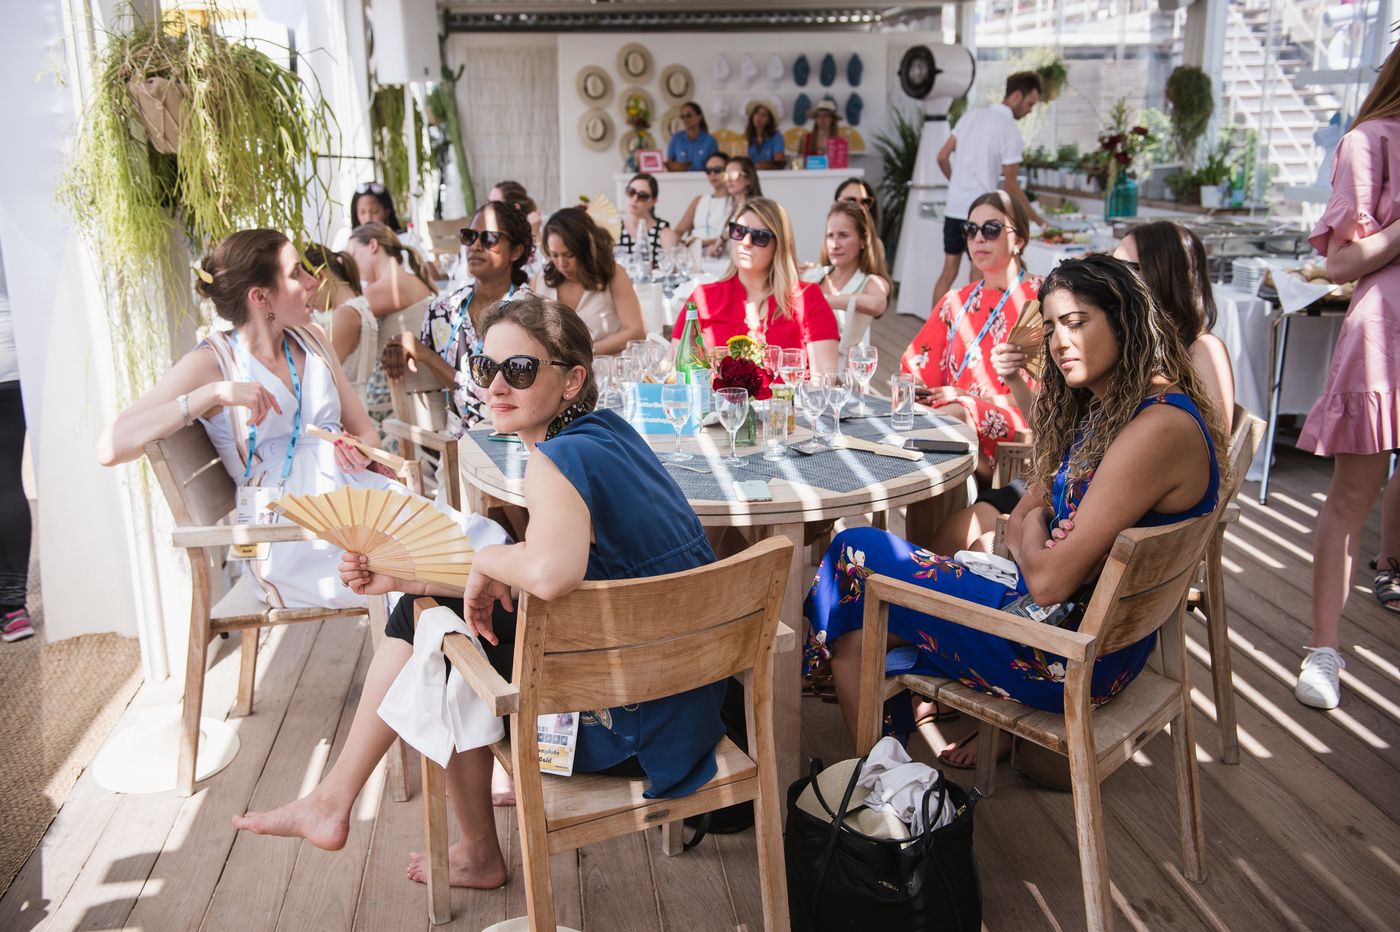  A brunch event hosted by Twitter at Cannes in 2018. Under Musk, the company is dialing back on such promotions at Cannes this year. PHOTO: FRANCOIS DURAND/GETTY IMAGES FOR TWITTER